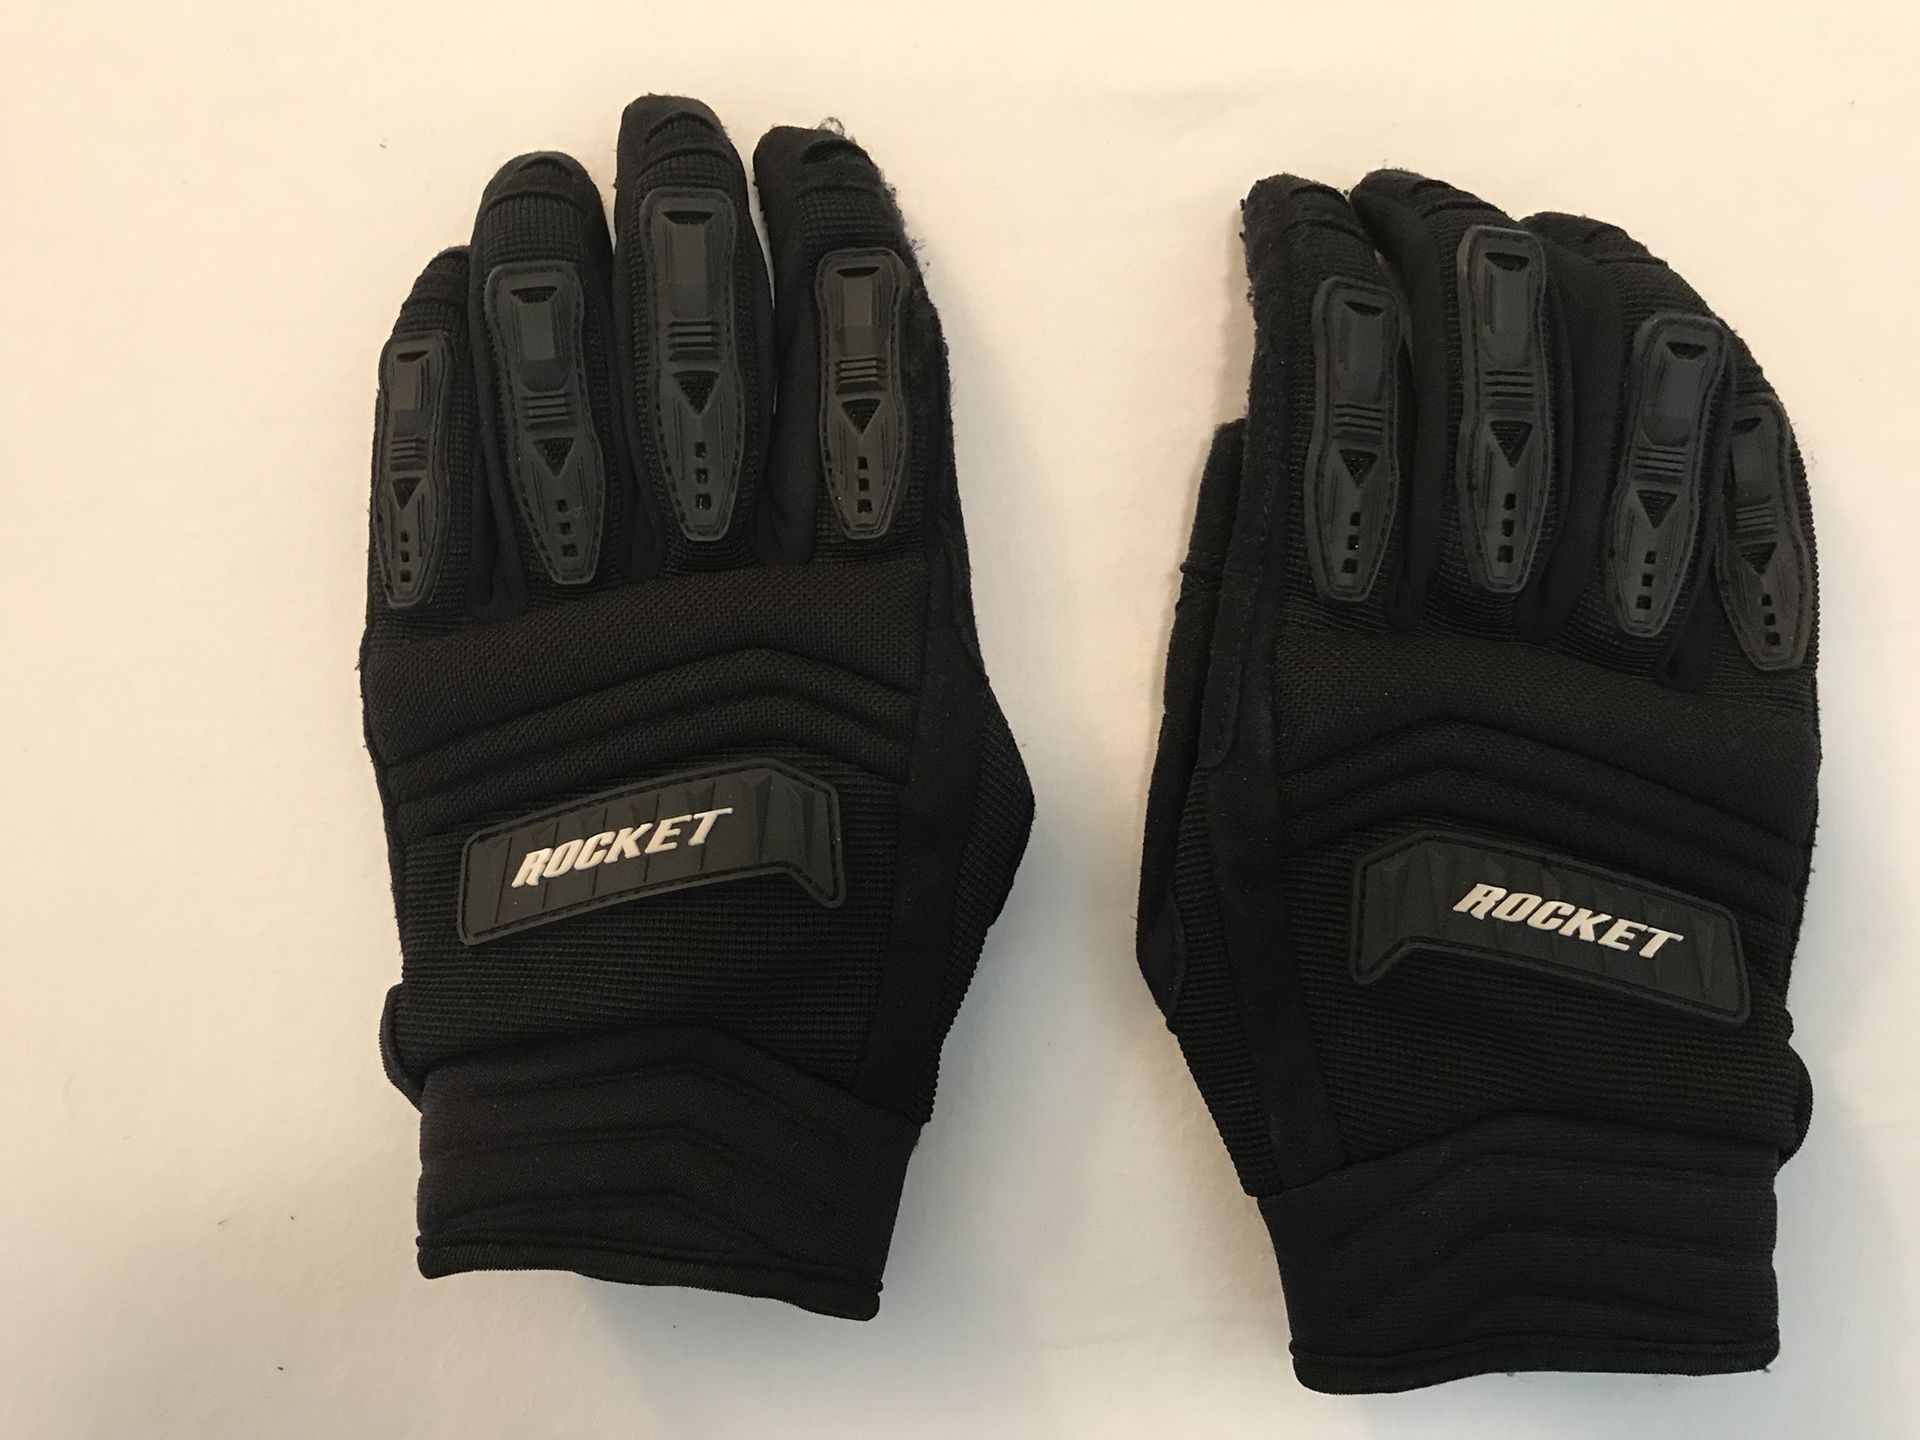 Motorcycle gloves - 2 pair size small